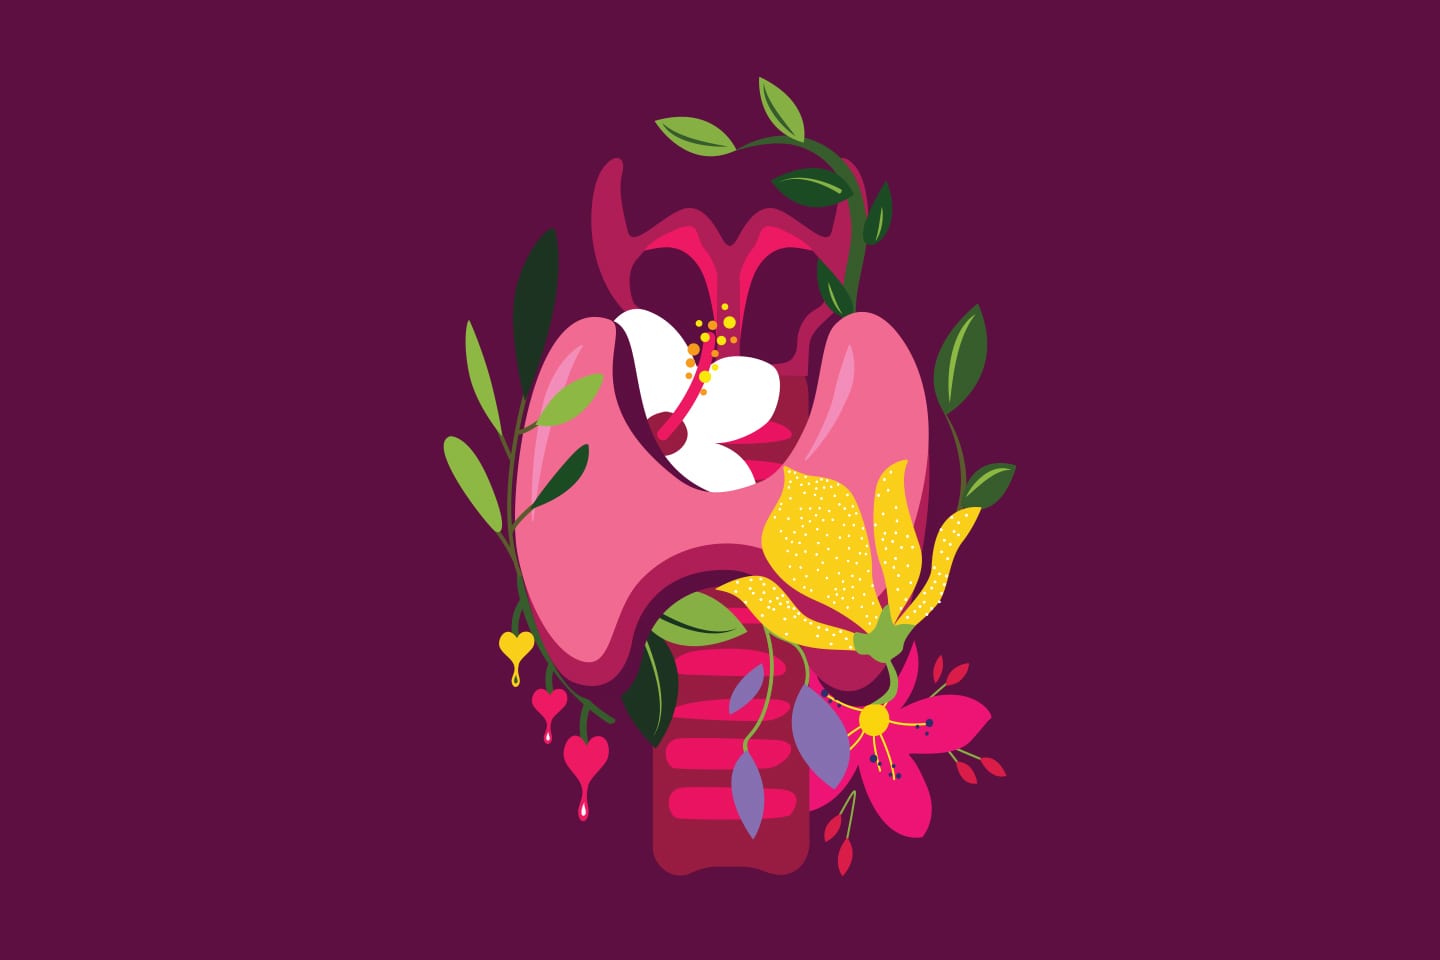 Illustration of a thyroid surrounded by flowers and plants